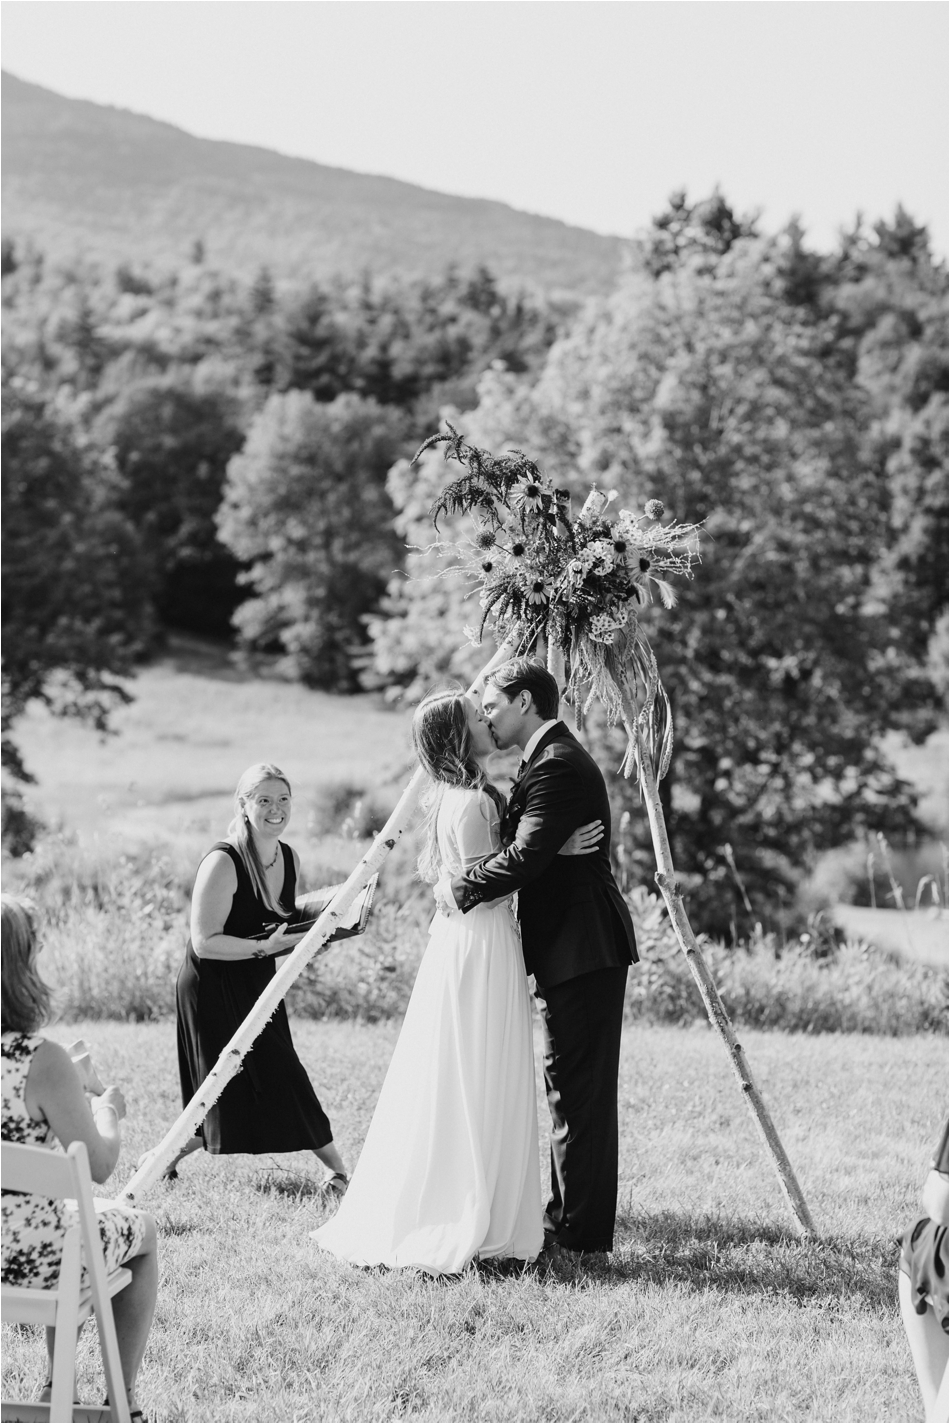 Kayla and Bill’s intimate wedding at The Bark Eater Inn in the Adirondack Mountains | Shaw Photo Co.